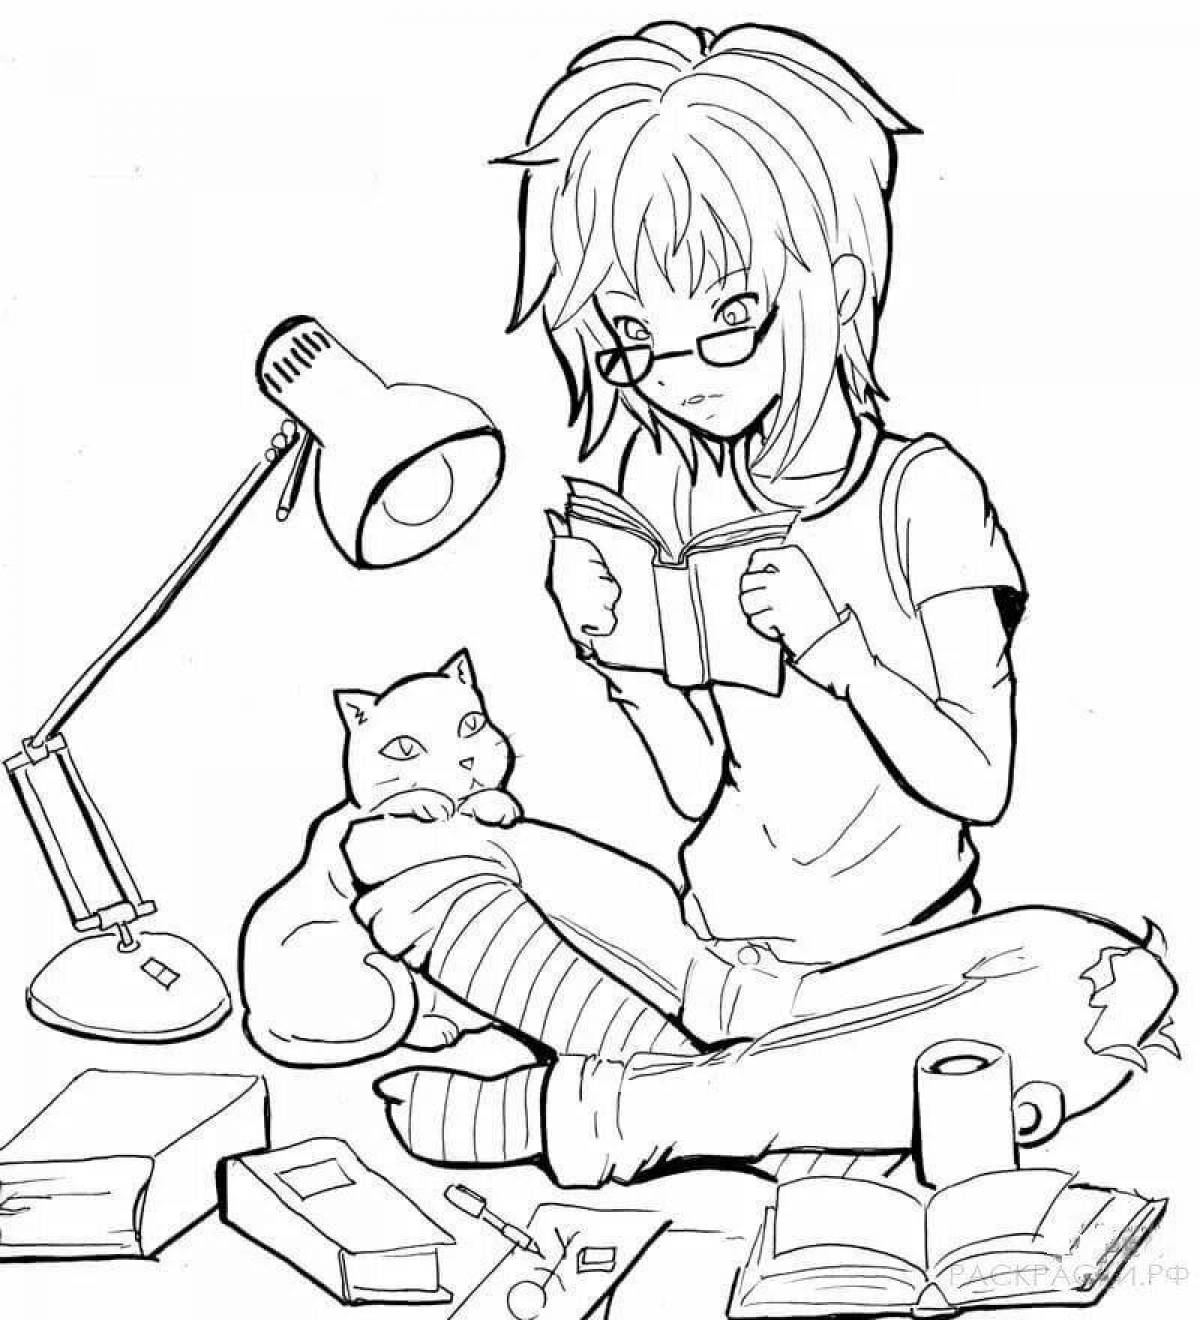 Delightful anime girl coloring pages